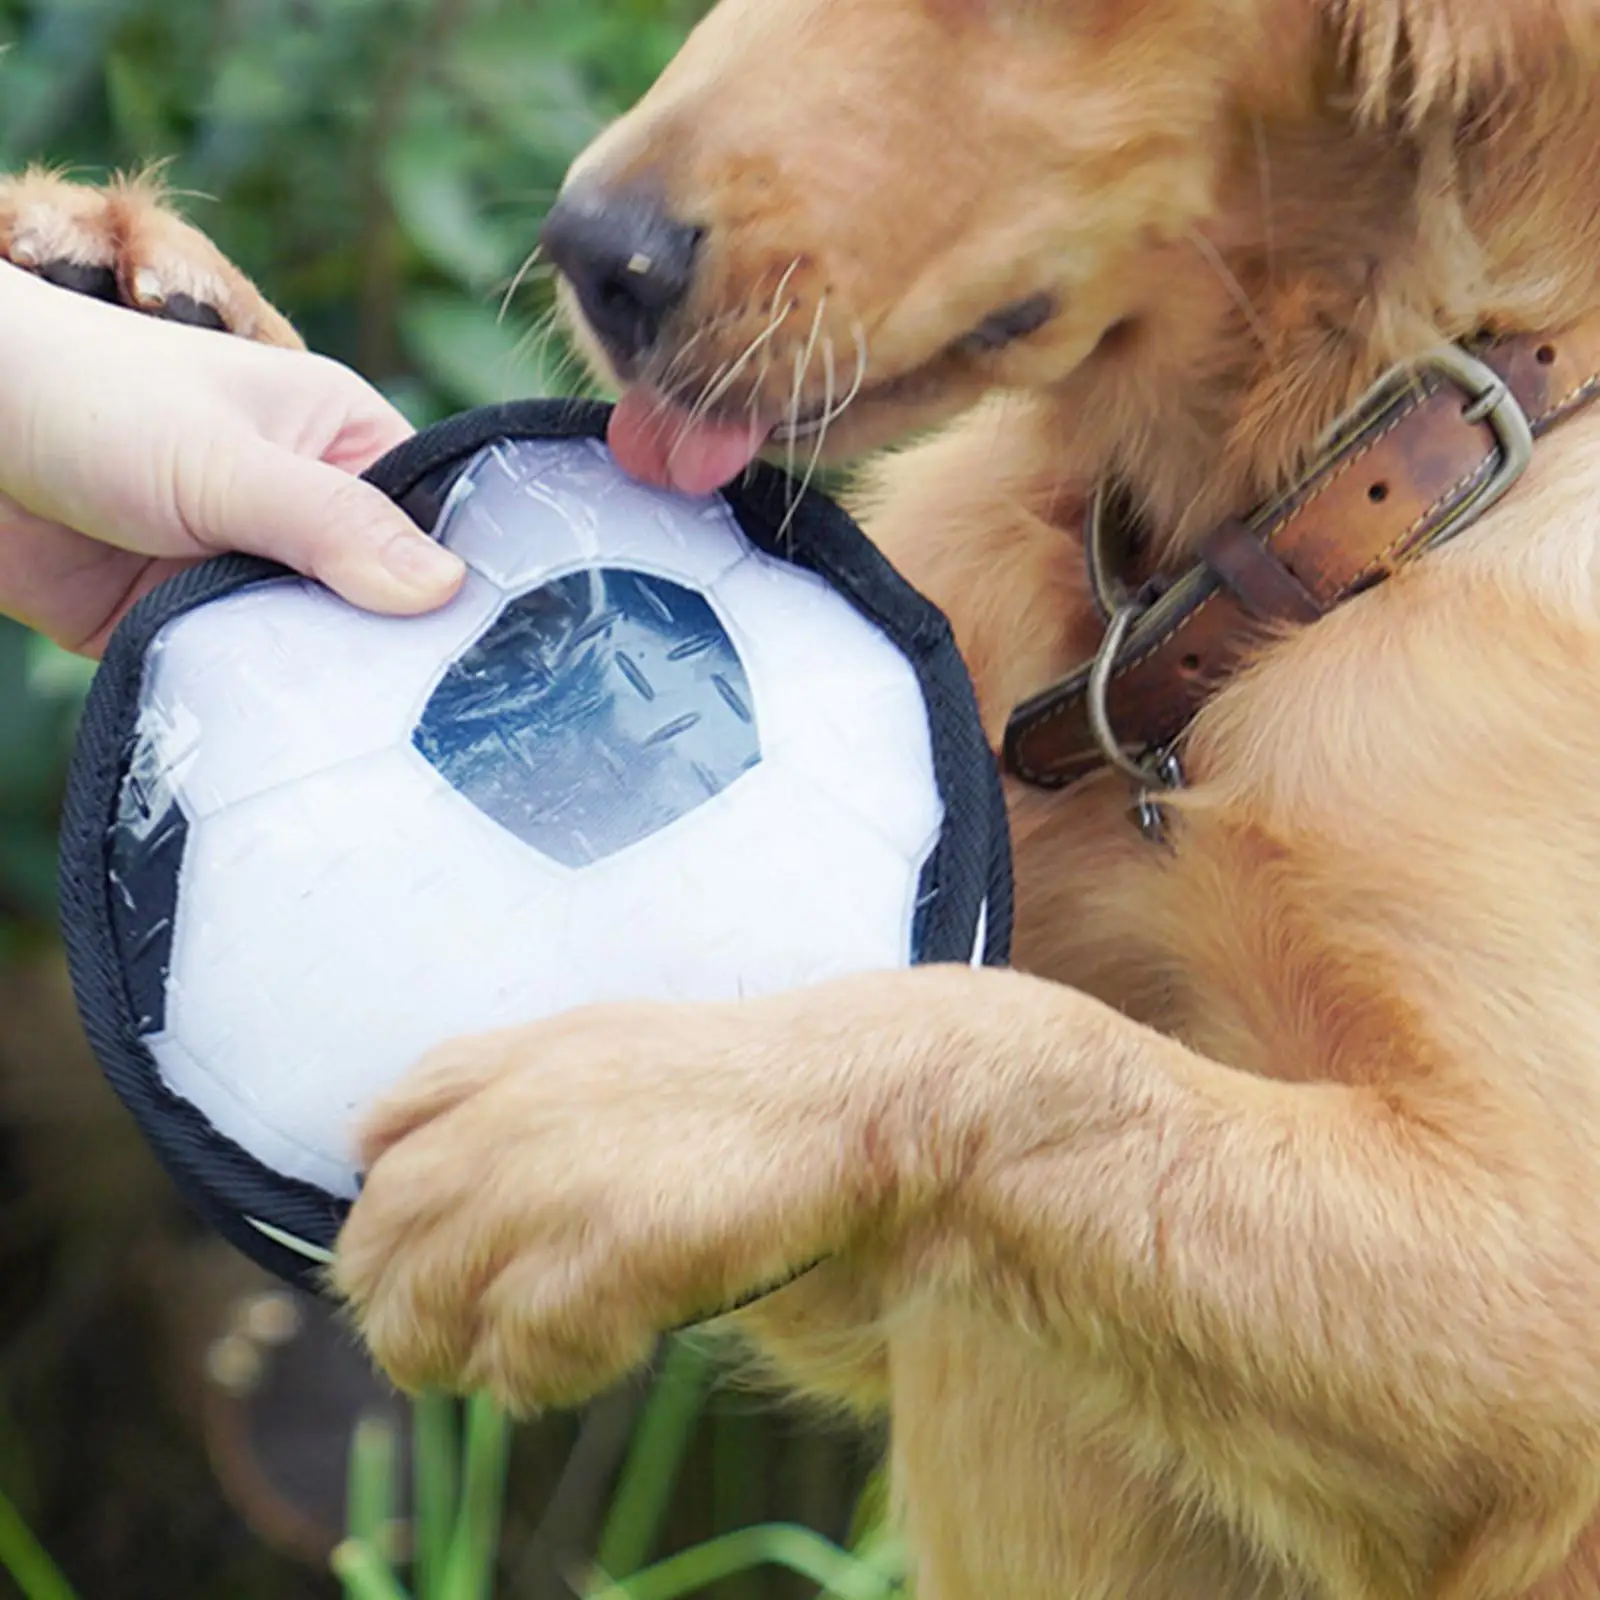 Interactive Dog Toys Ball Chew Toy for Aggressive Chewers Adjustable for Small Medium Large Dog Yard